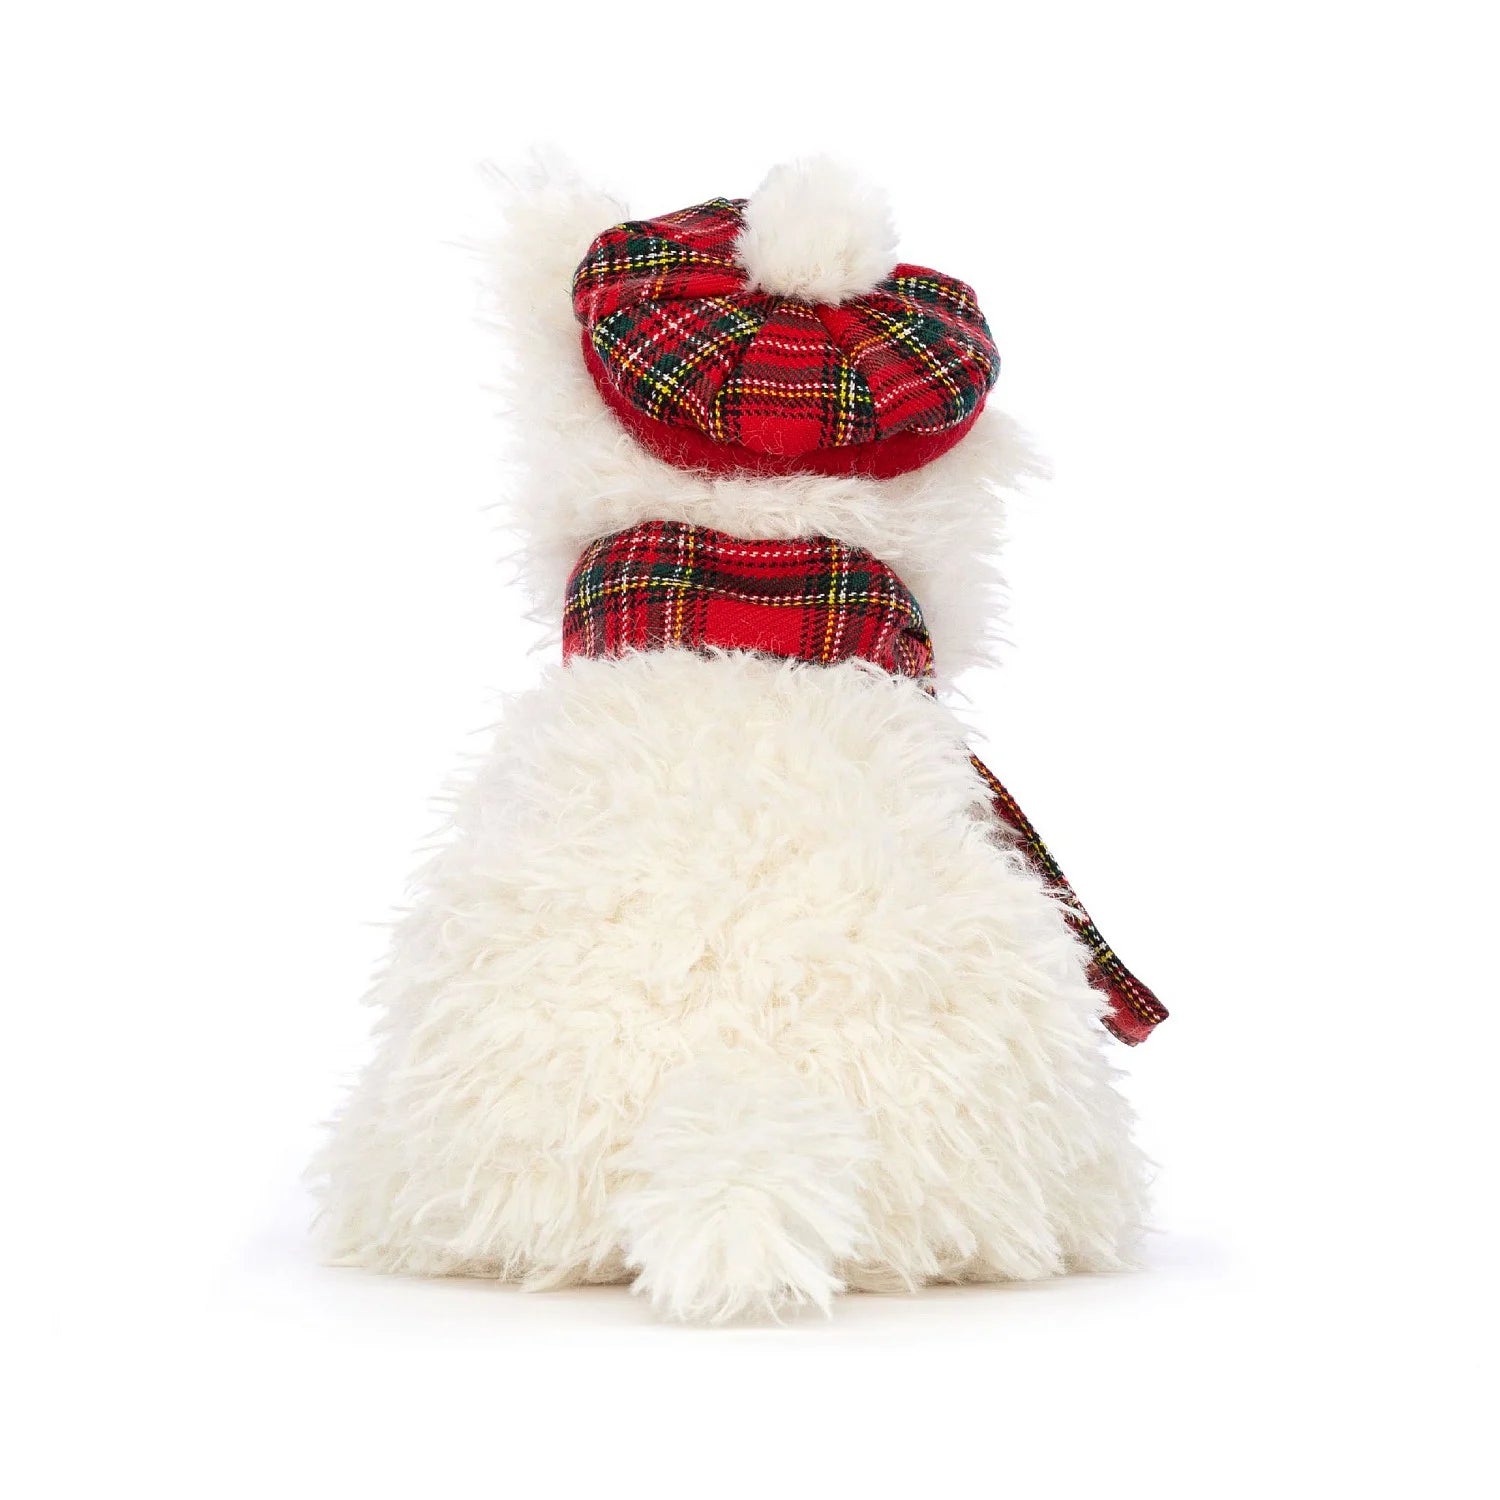 View of backside: Munro the Scottie Dog is a white plush stuffed dog with luxurious fur. This Winter Warmer version of Munro Scottie Dog adds an extra stylish red tartan plaid scarf around its neck. Munro's floppy ears and wagging tail give it an endearing and playful appearance. Its high-quality craftsmanship and attention to detail make it a fantastic choice for dog lovers of all ages.